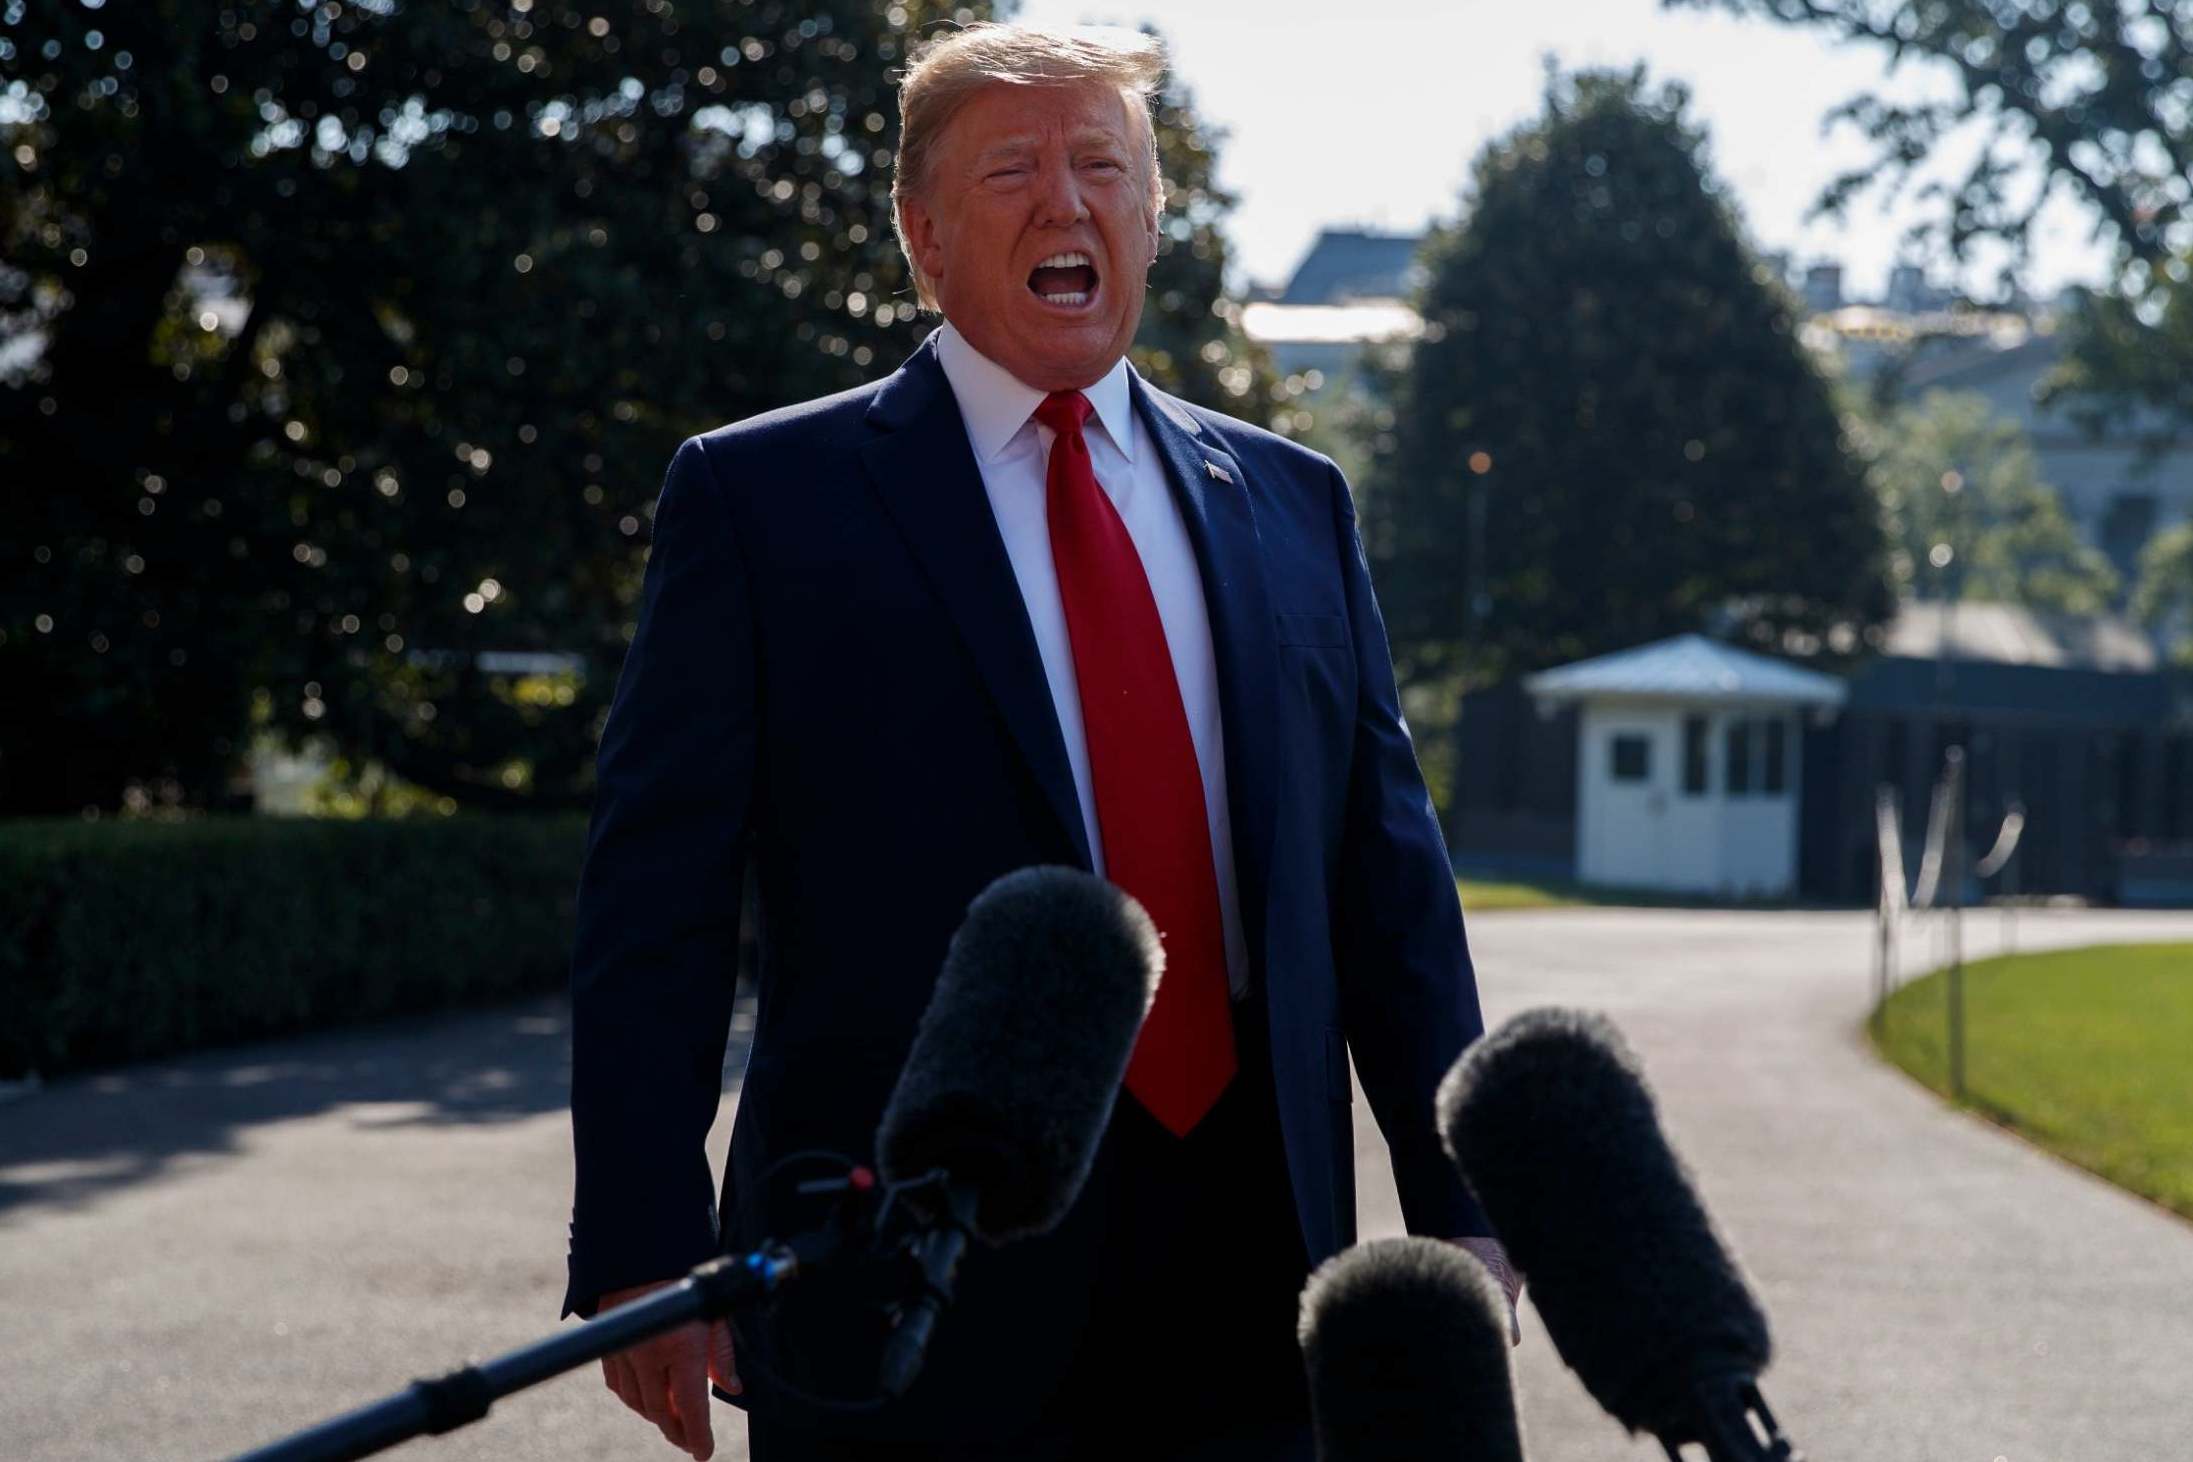 Trump news – live: President claims to be 'least racist person' as second Democratic debate looms